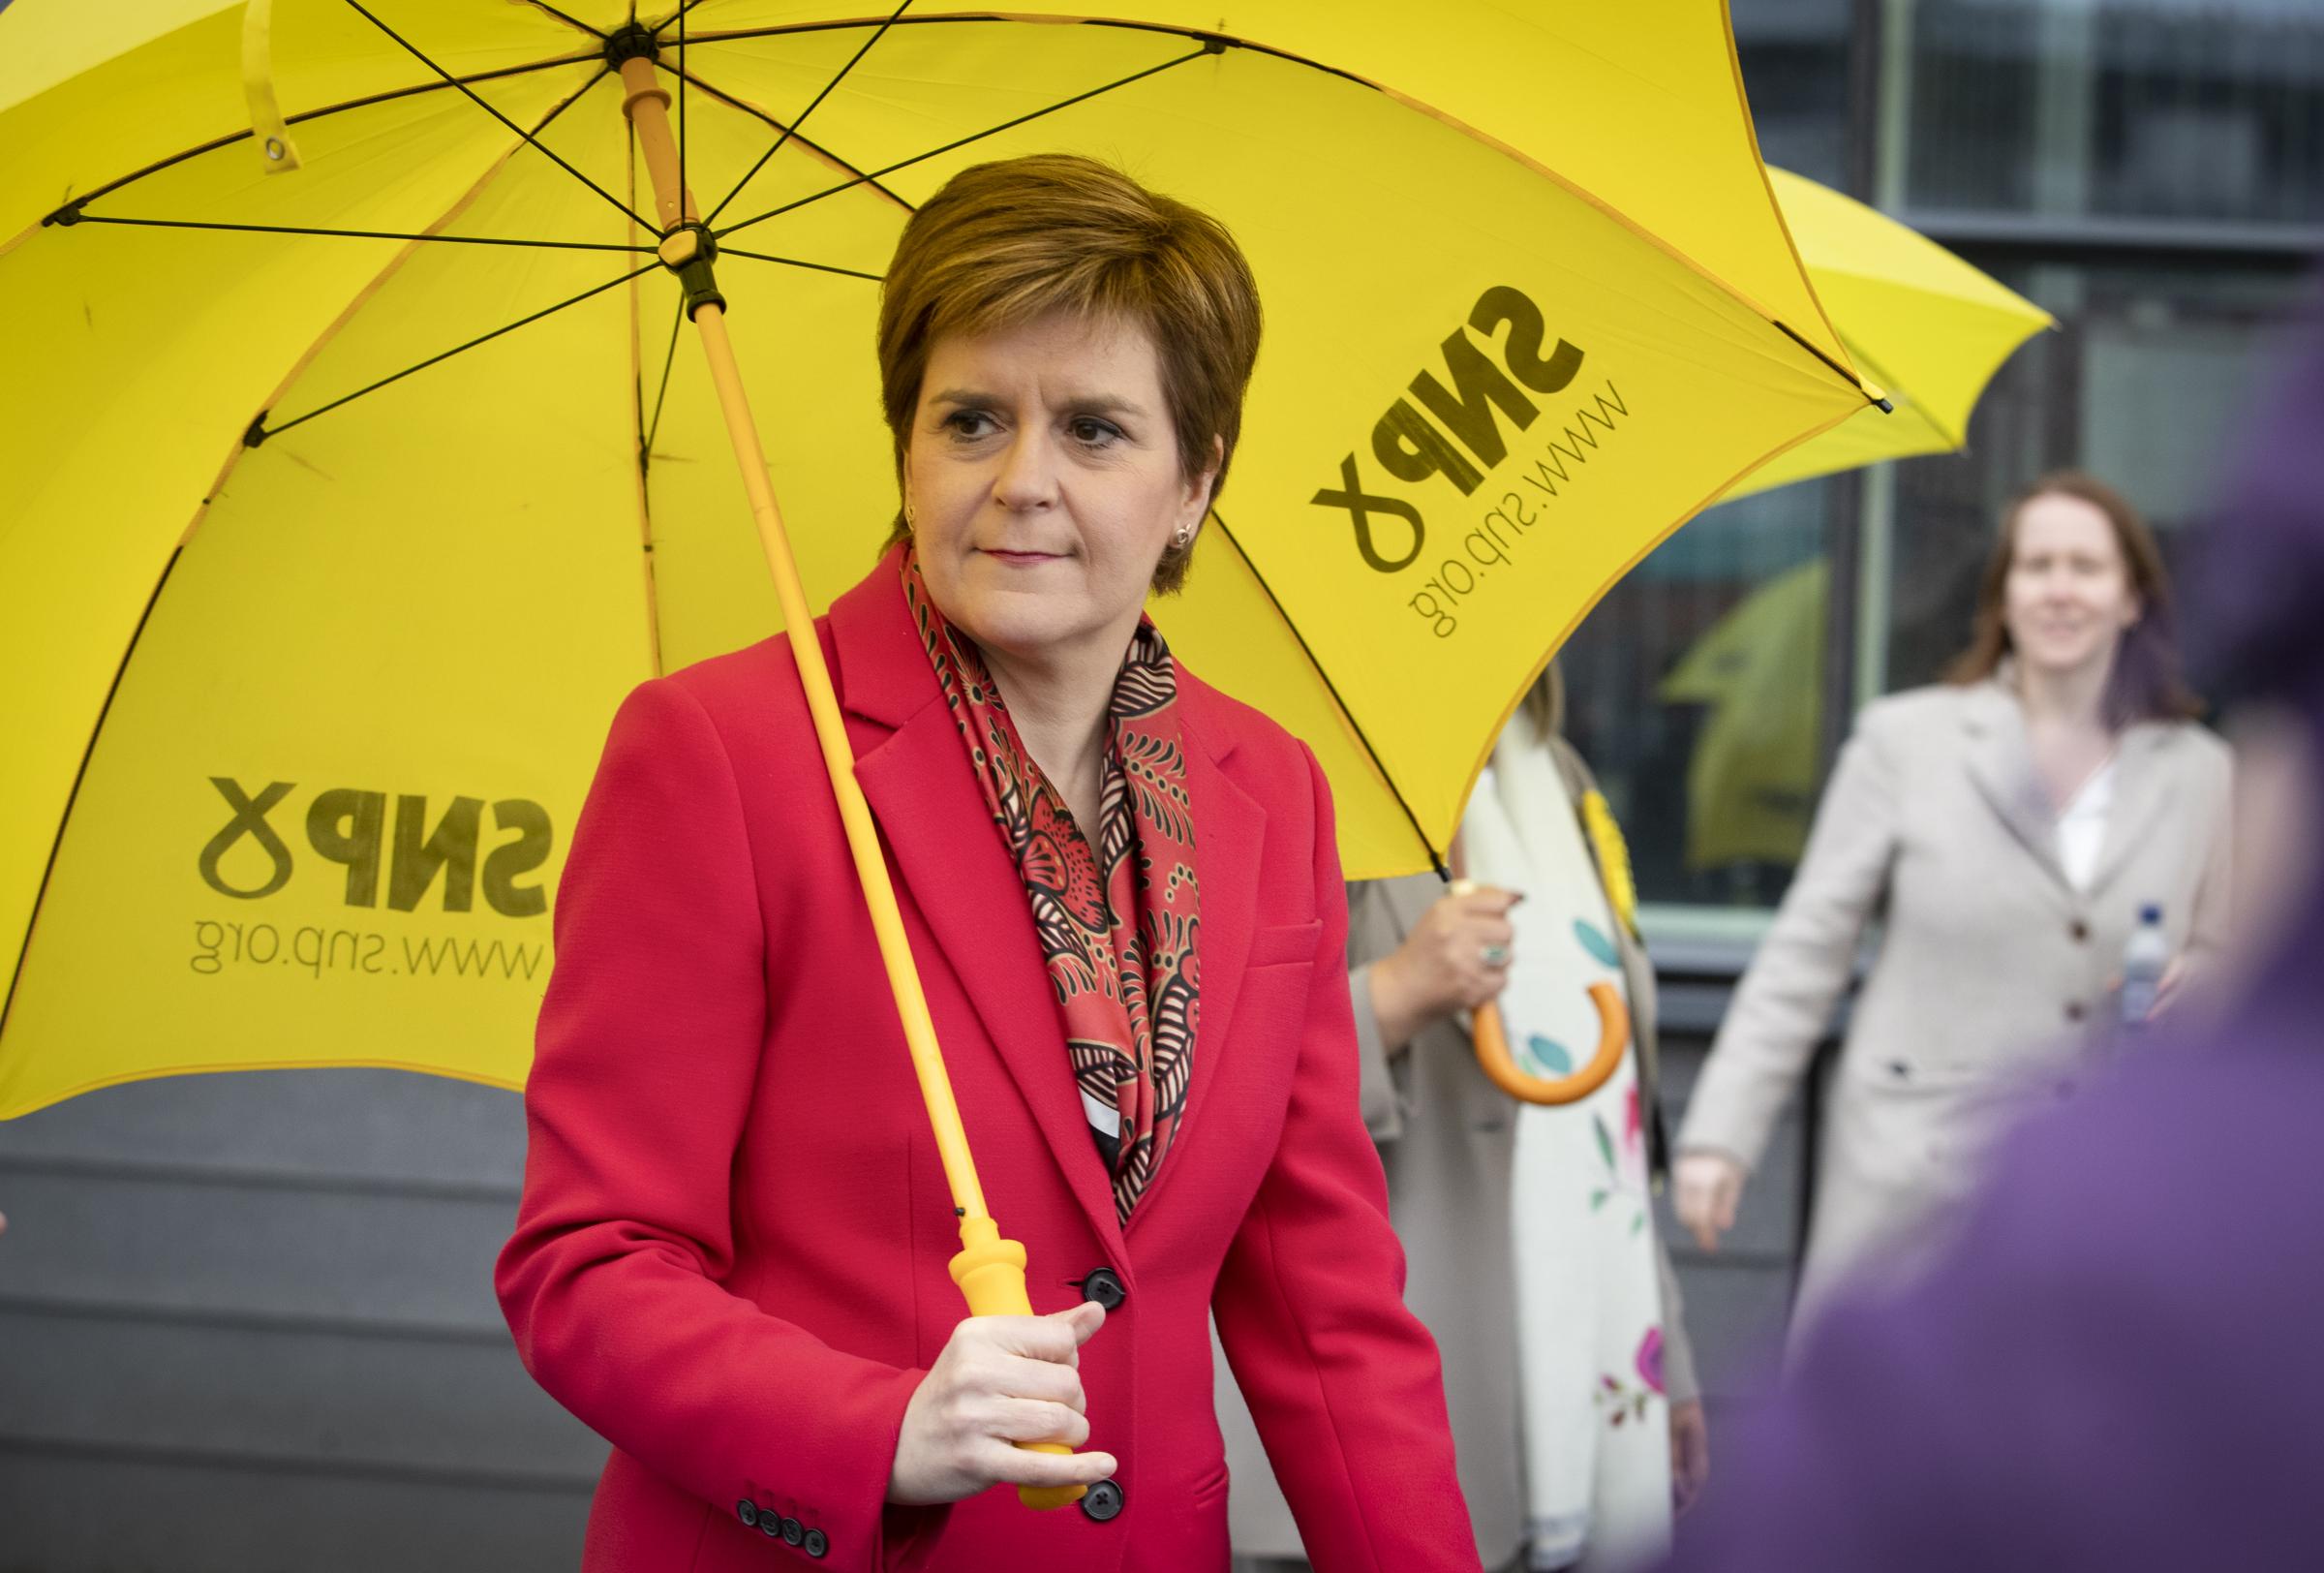 SNP emphatically won election and indyref2 must now happen, Nicola Sturgeon says